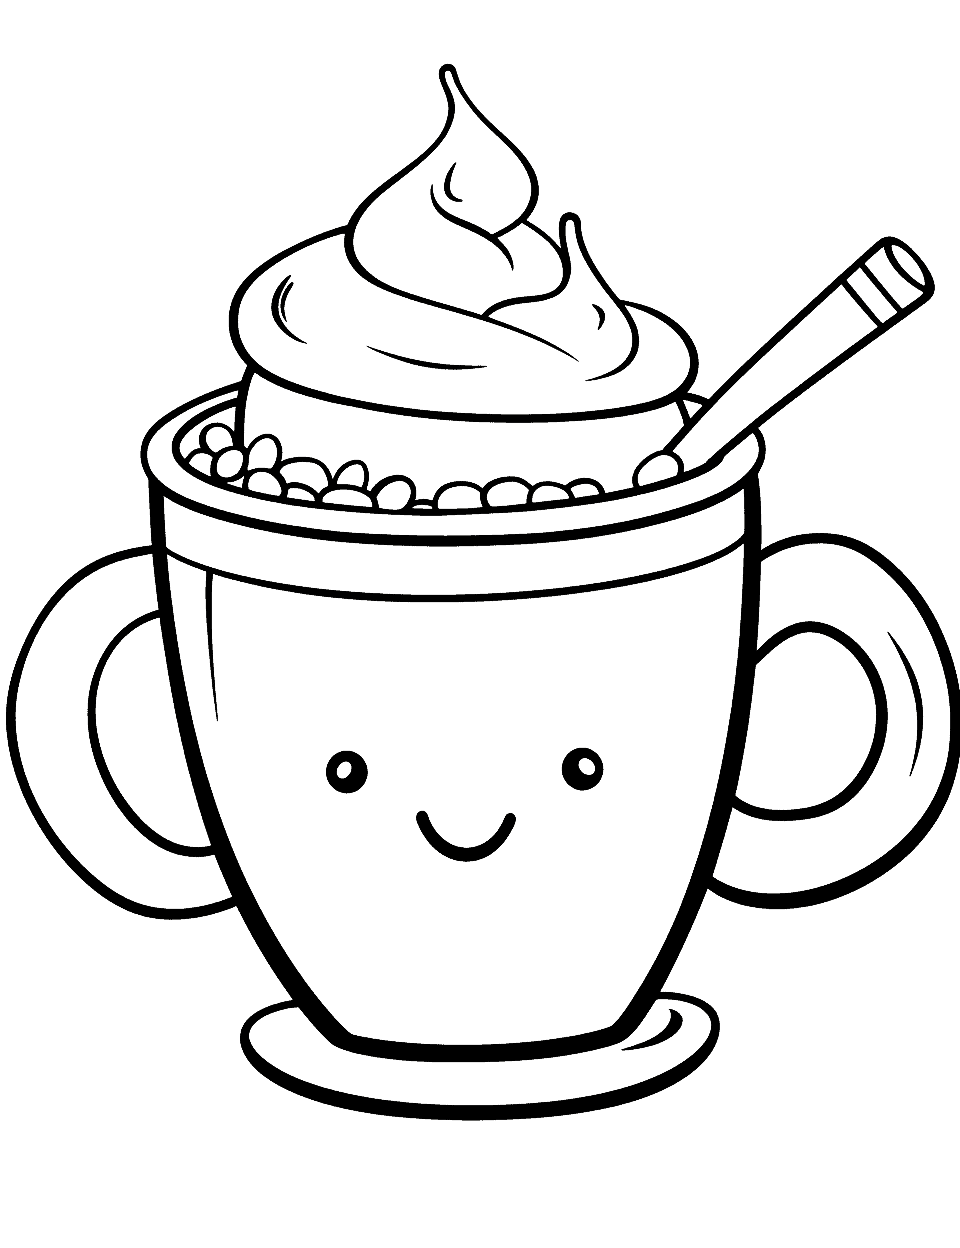 Cute coloring pages free printable sheets